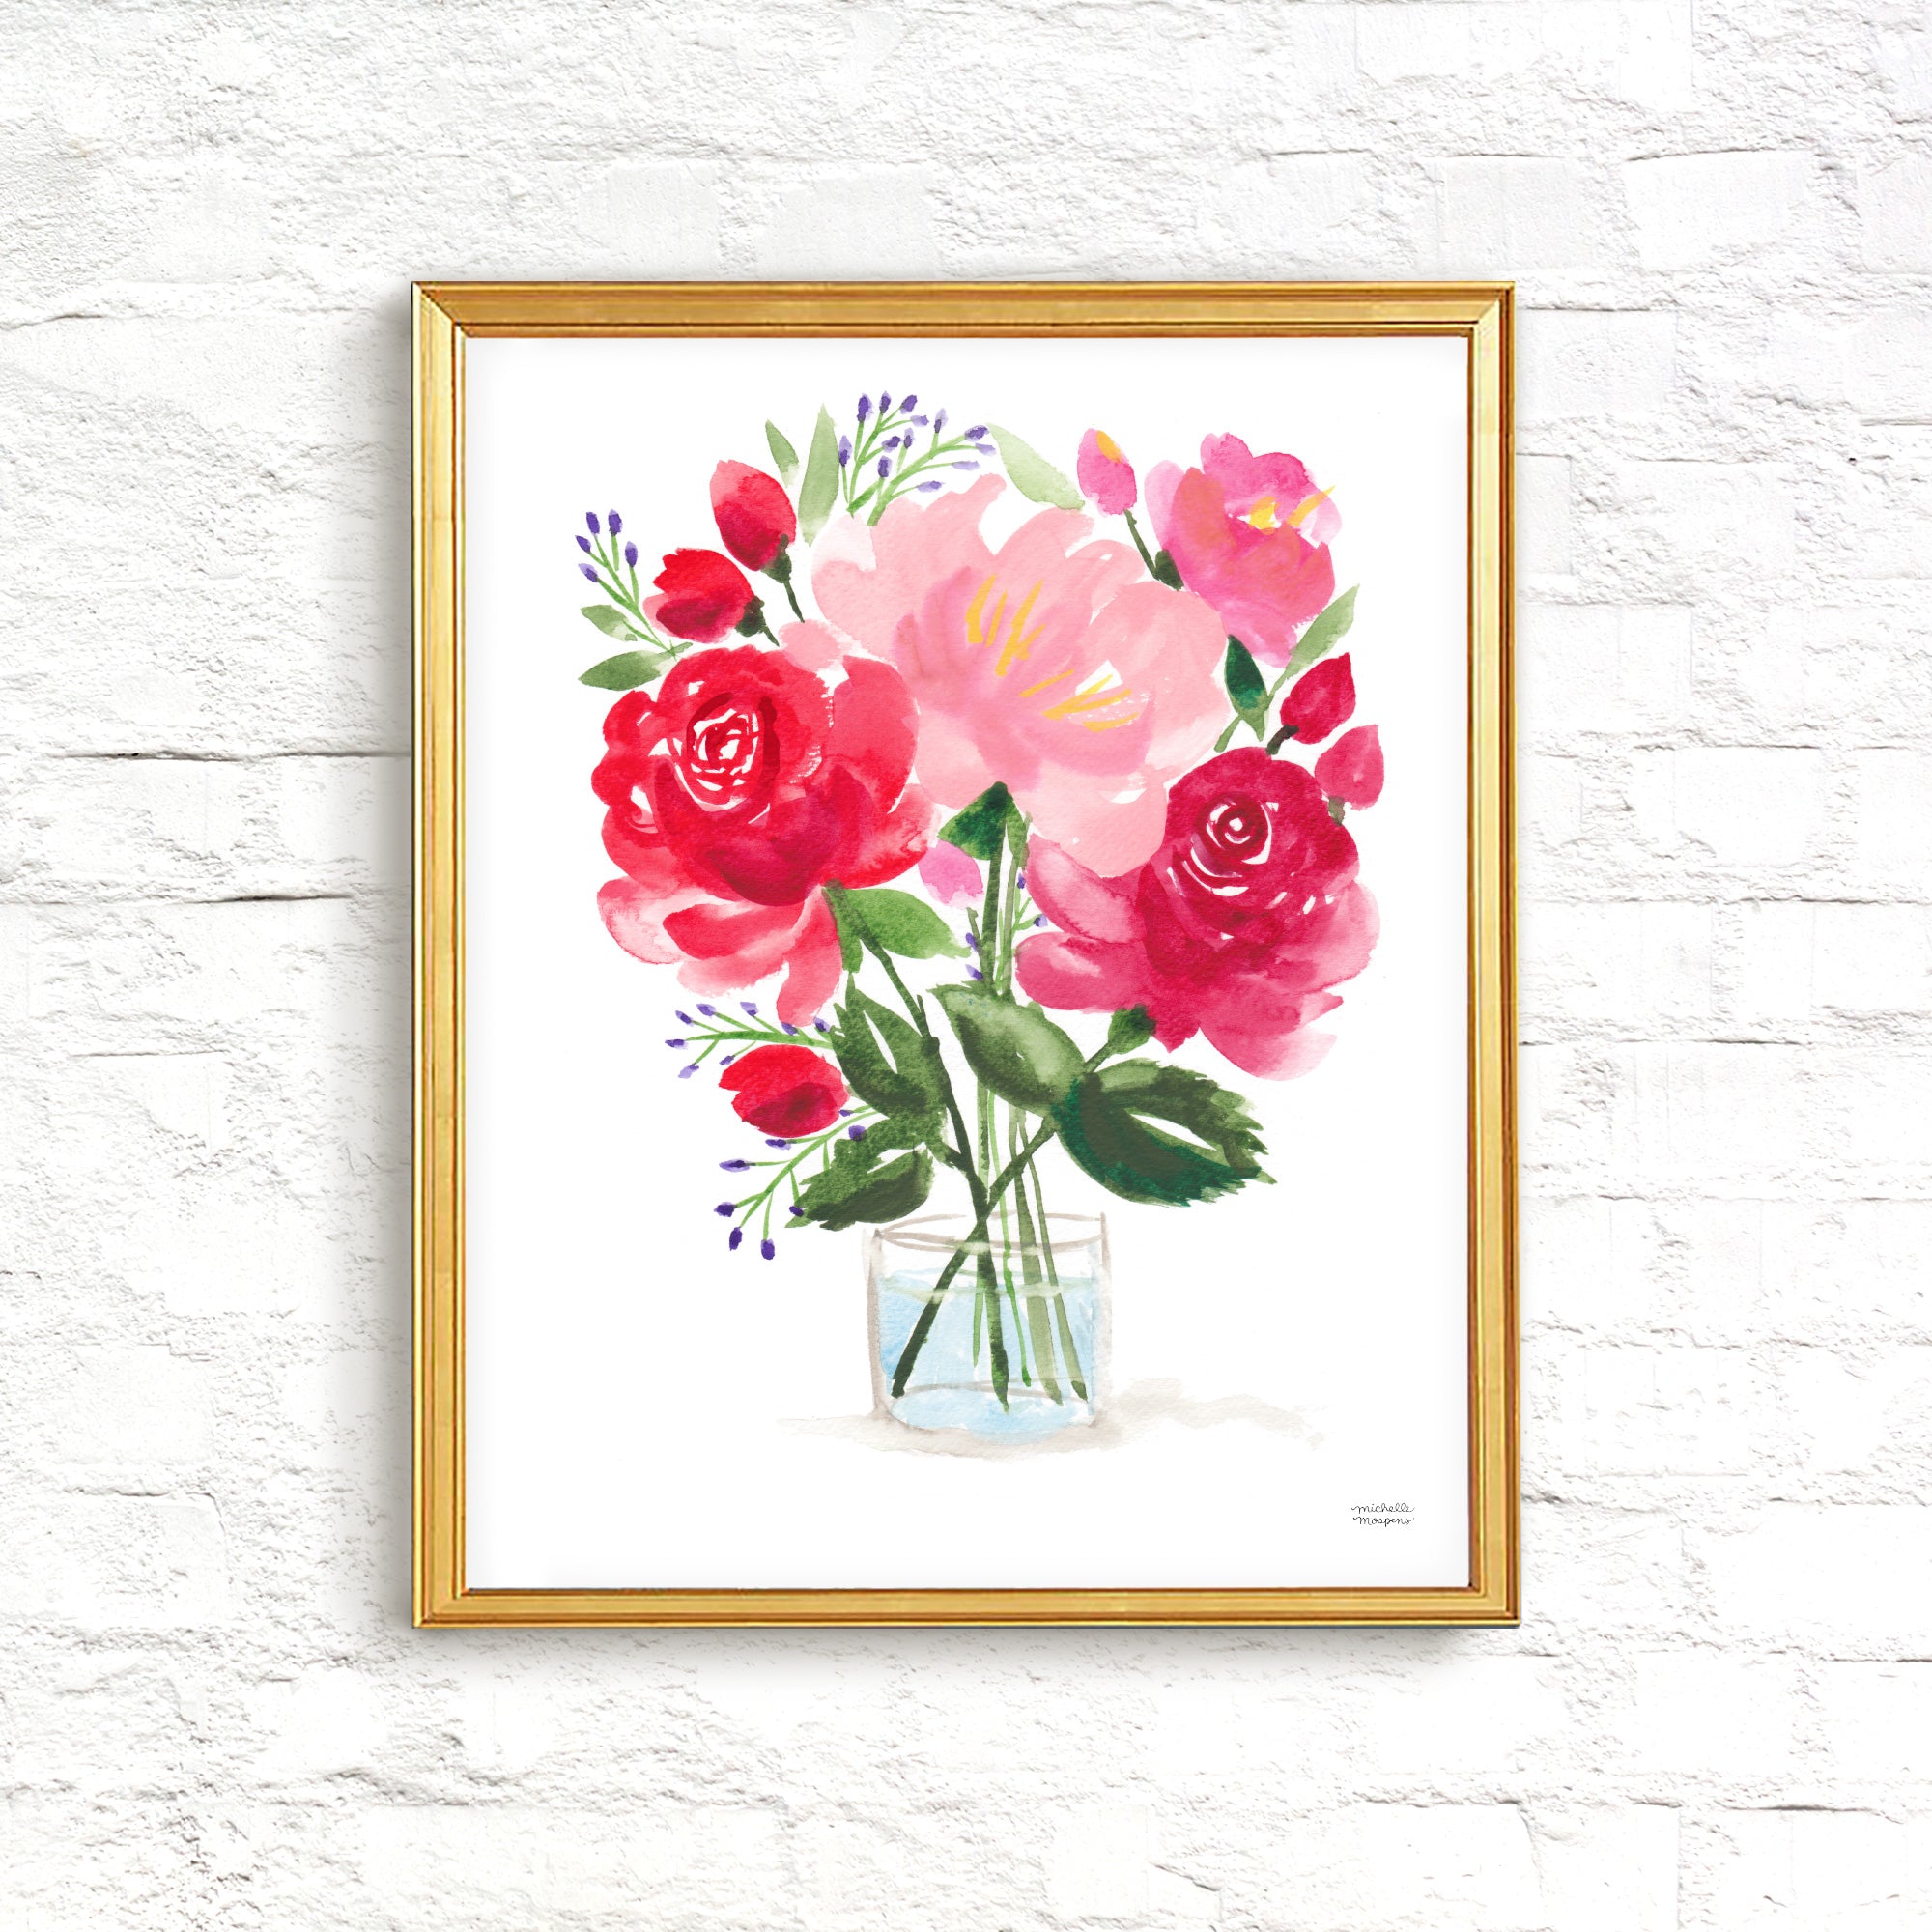 Painterly Red Roses Floral Bouquet Wall Art Print by Michelle Mospens